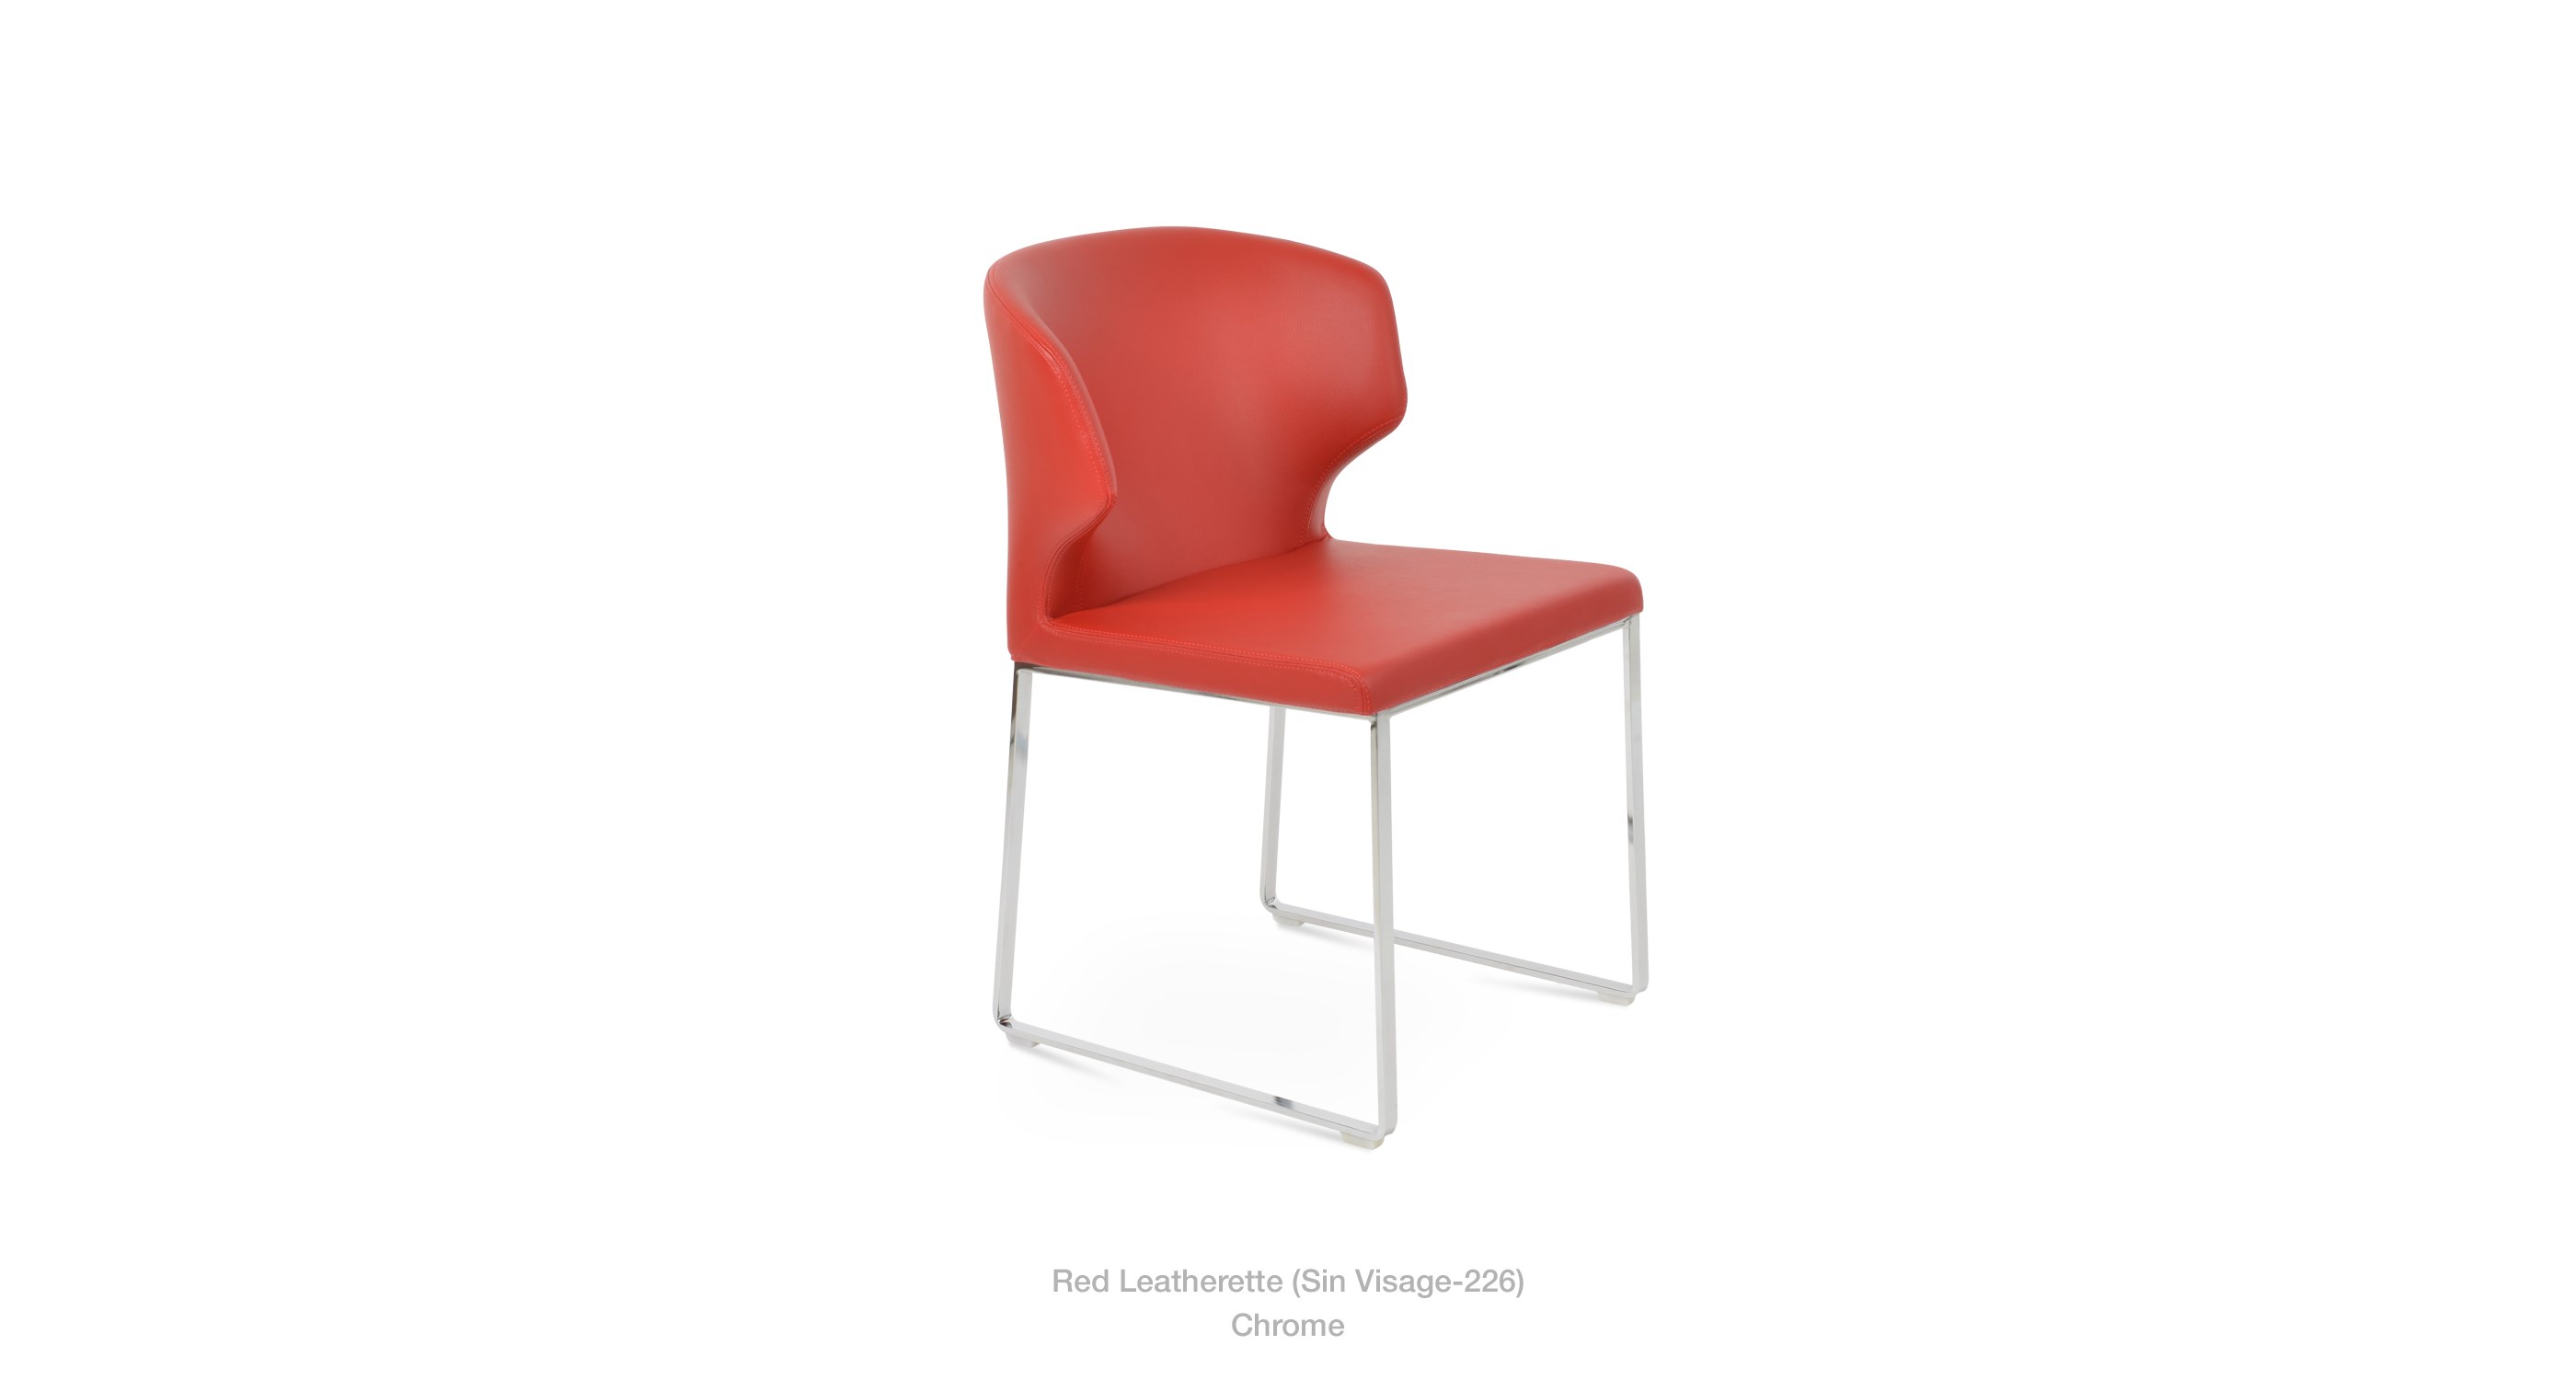 red leatherette - chrome